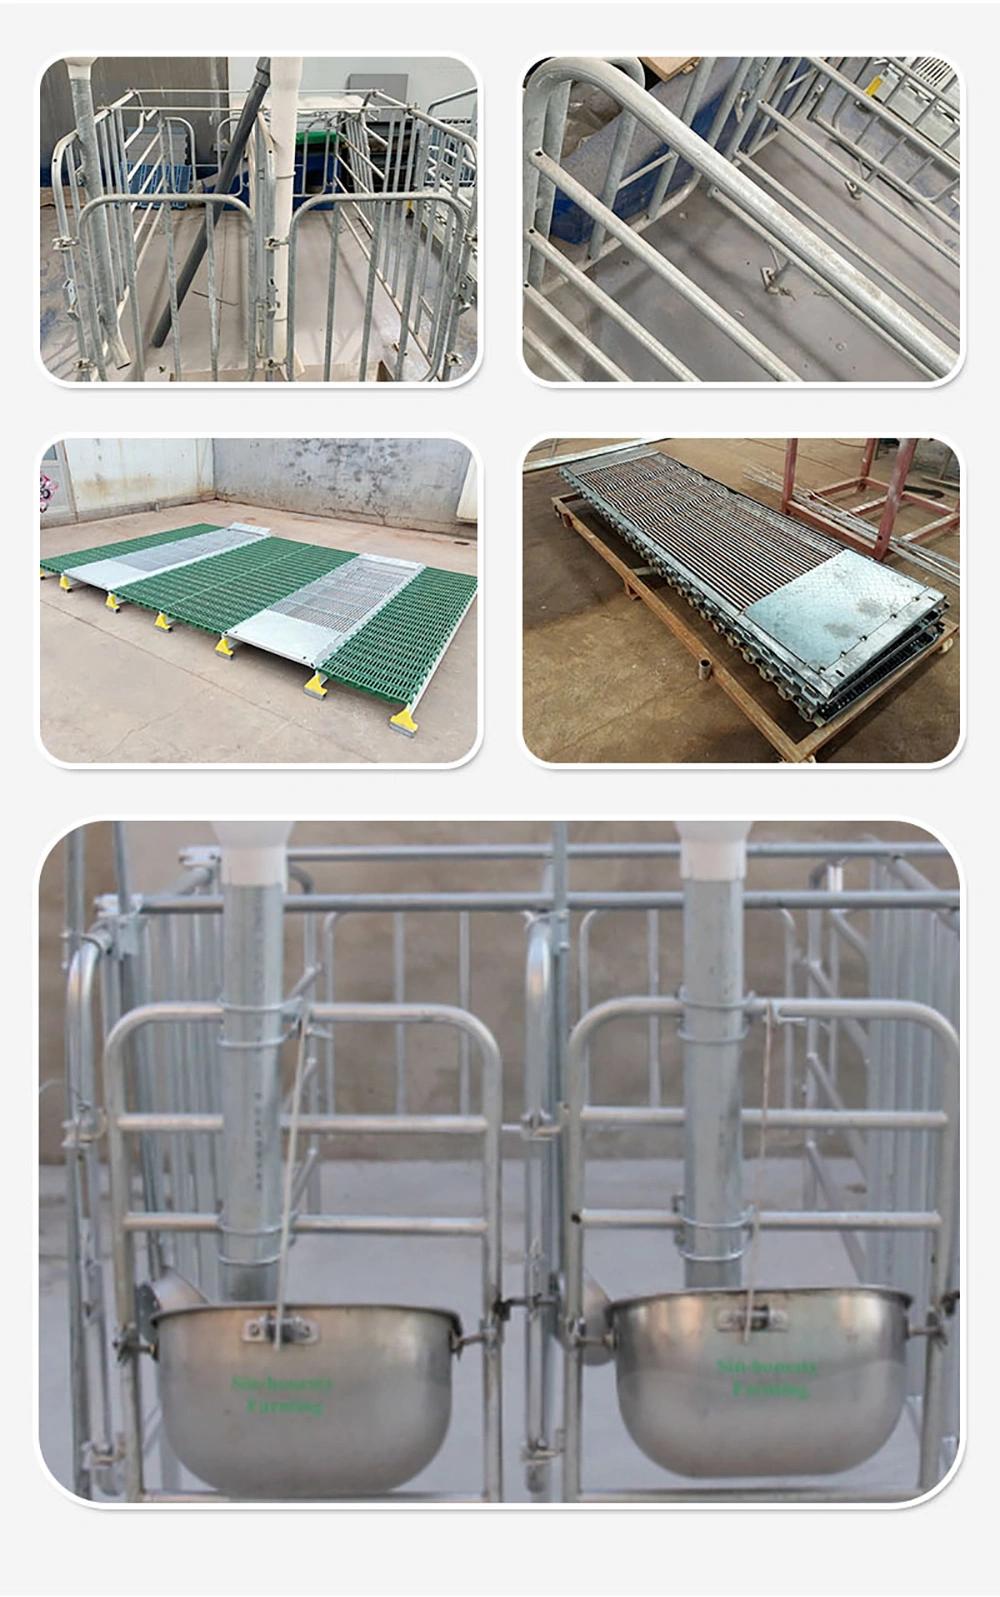 Sow Gestation Bed Galvanized Pig Farrowing Crates Pen Pig Flooring Stall Farrowing Bed